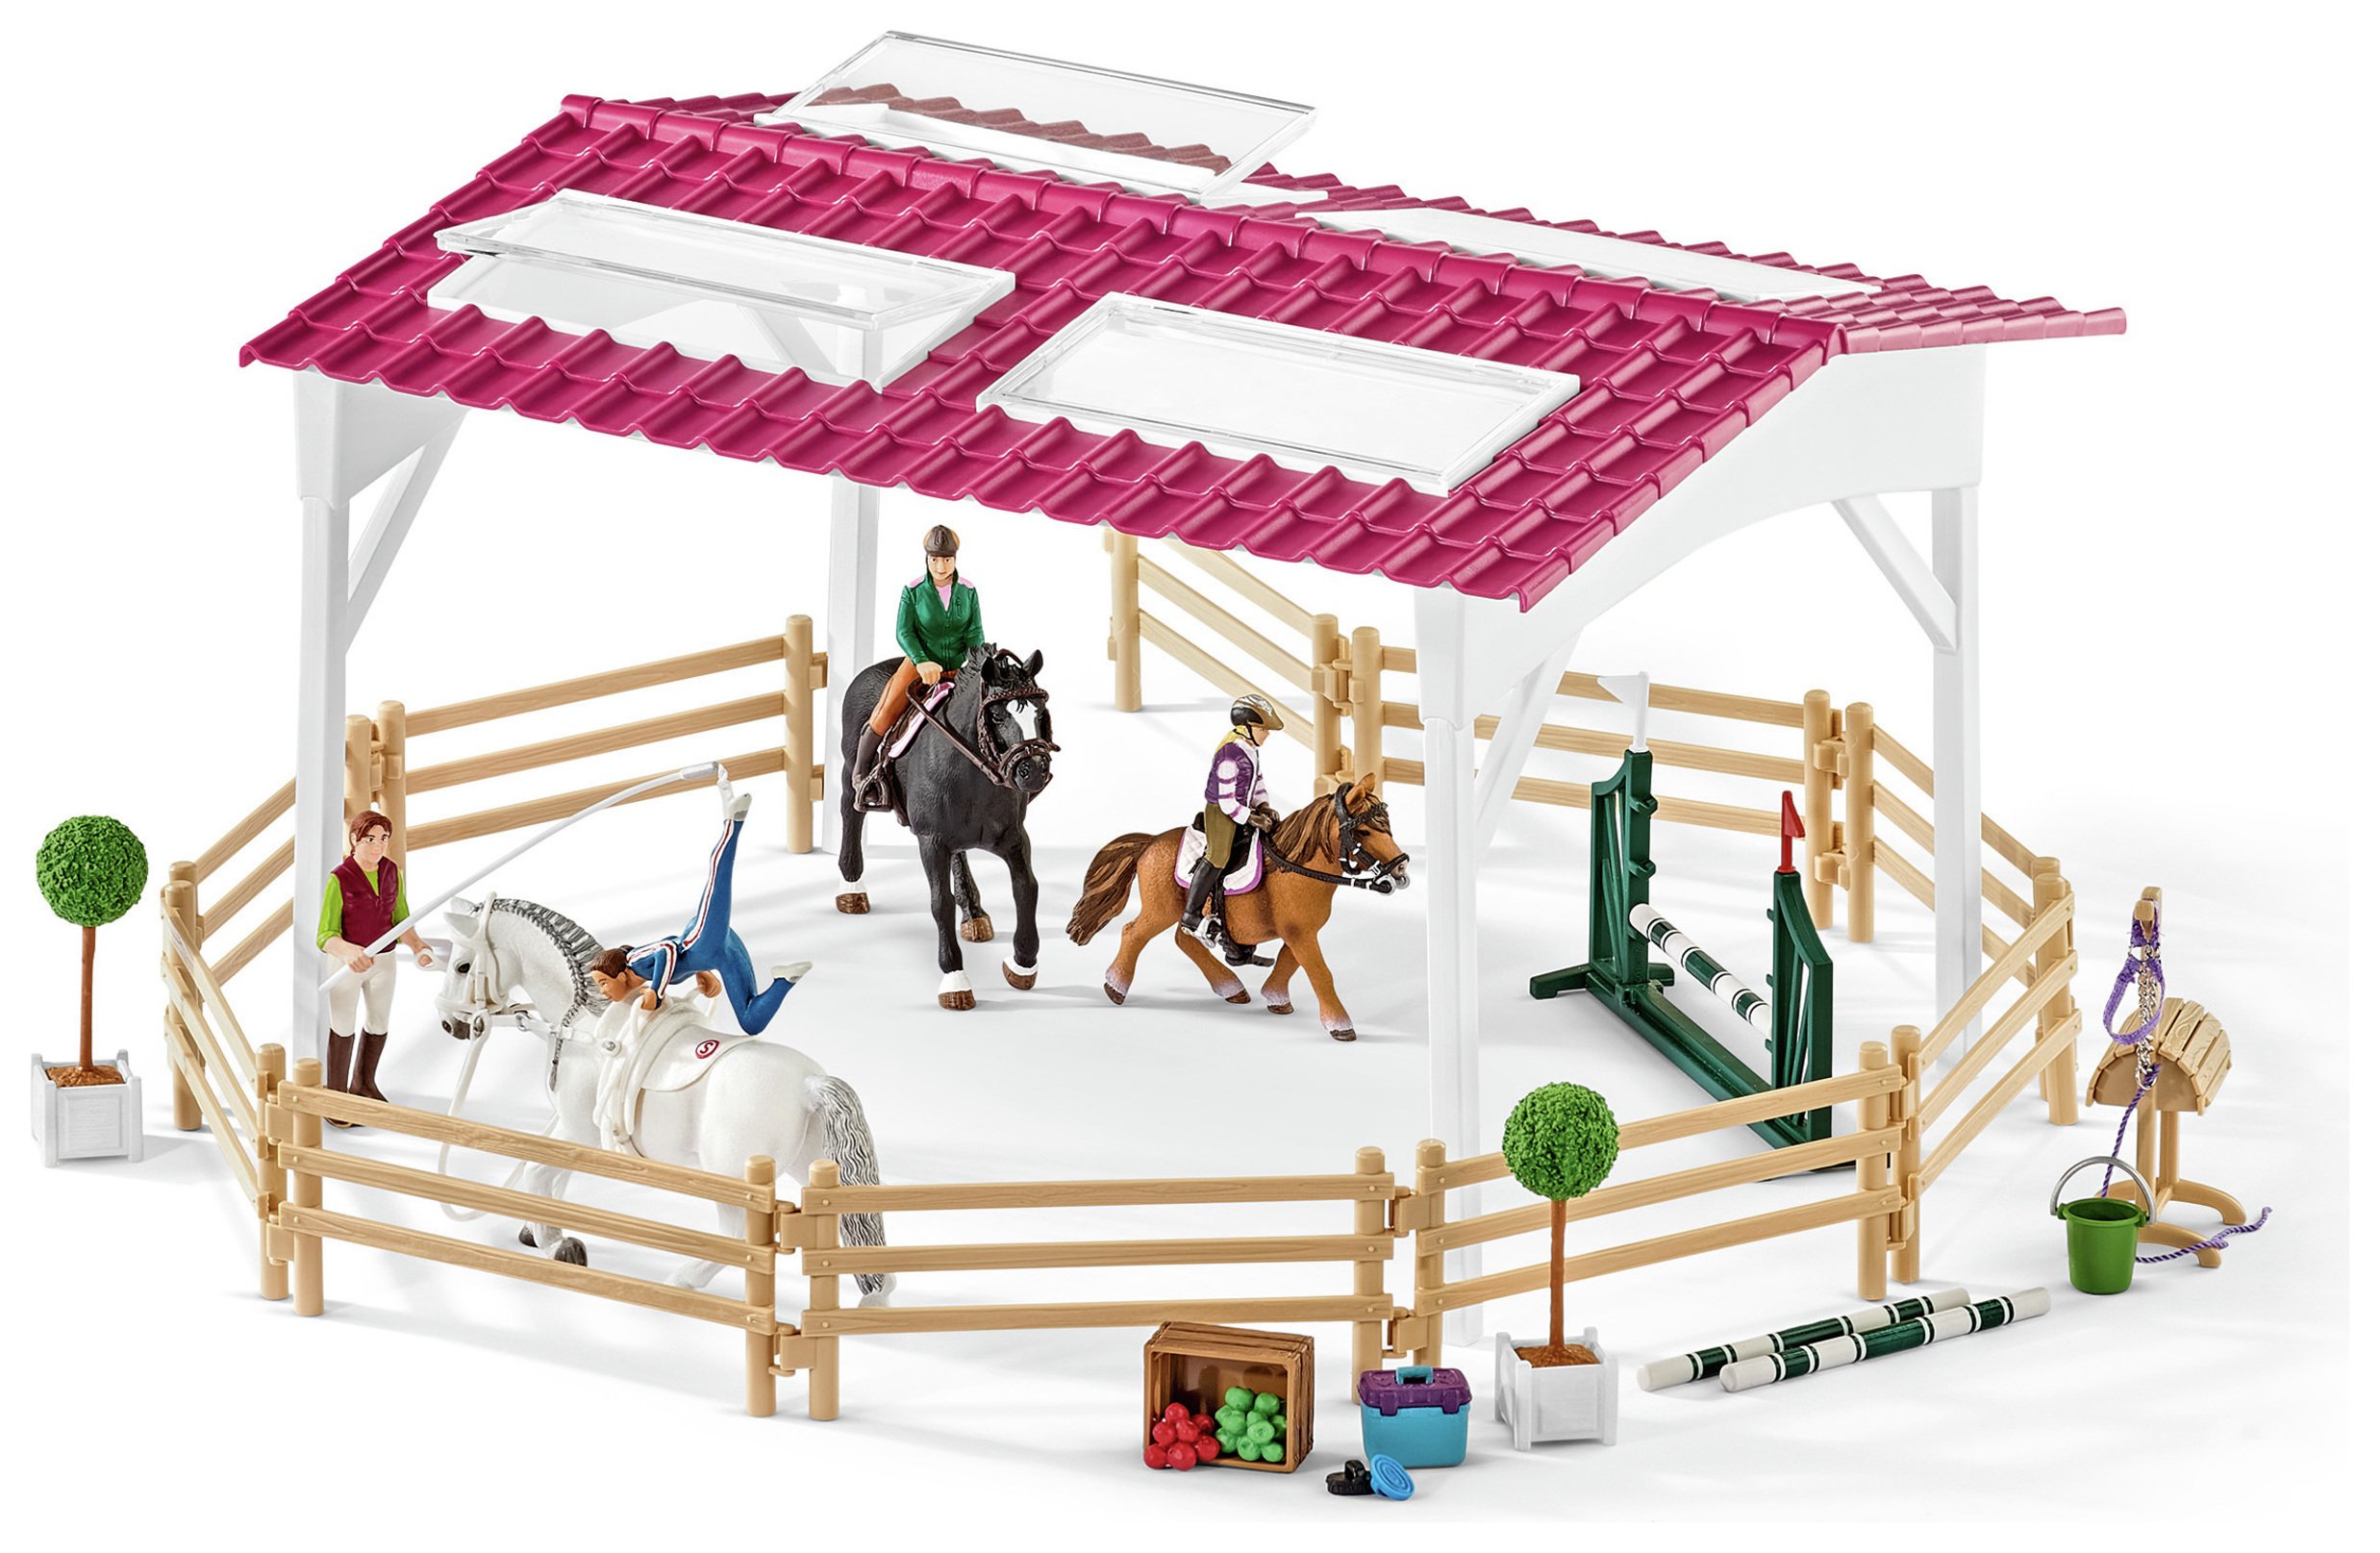 Schleich Riding School with Riders and Horses Playset